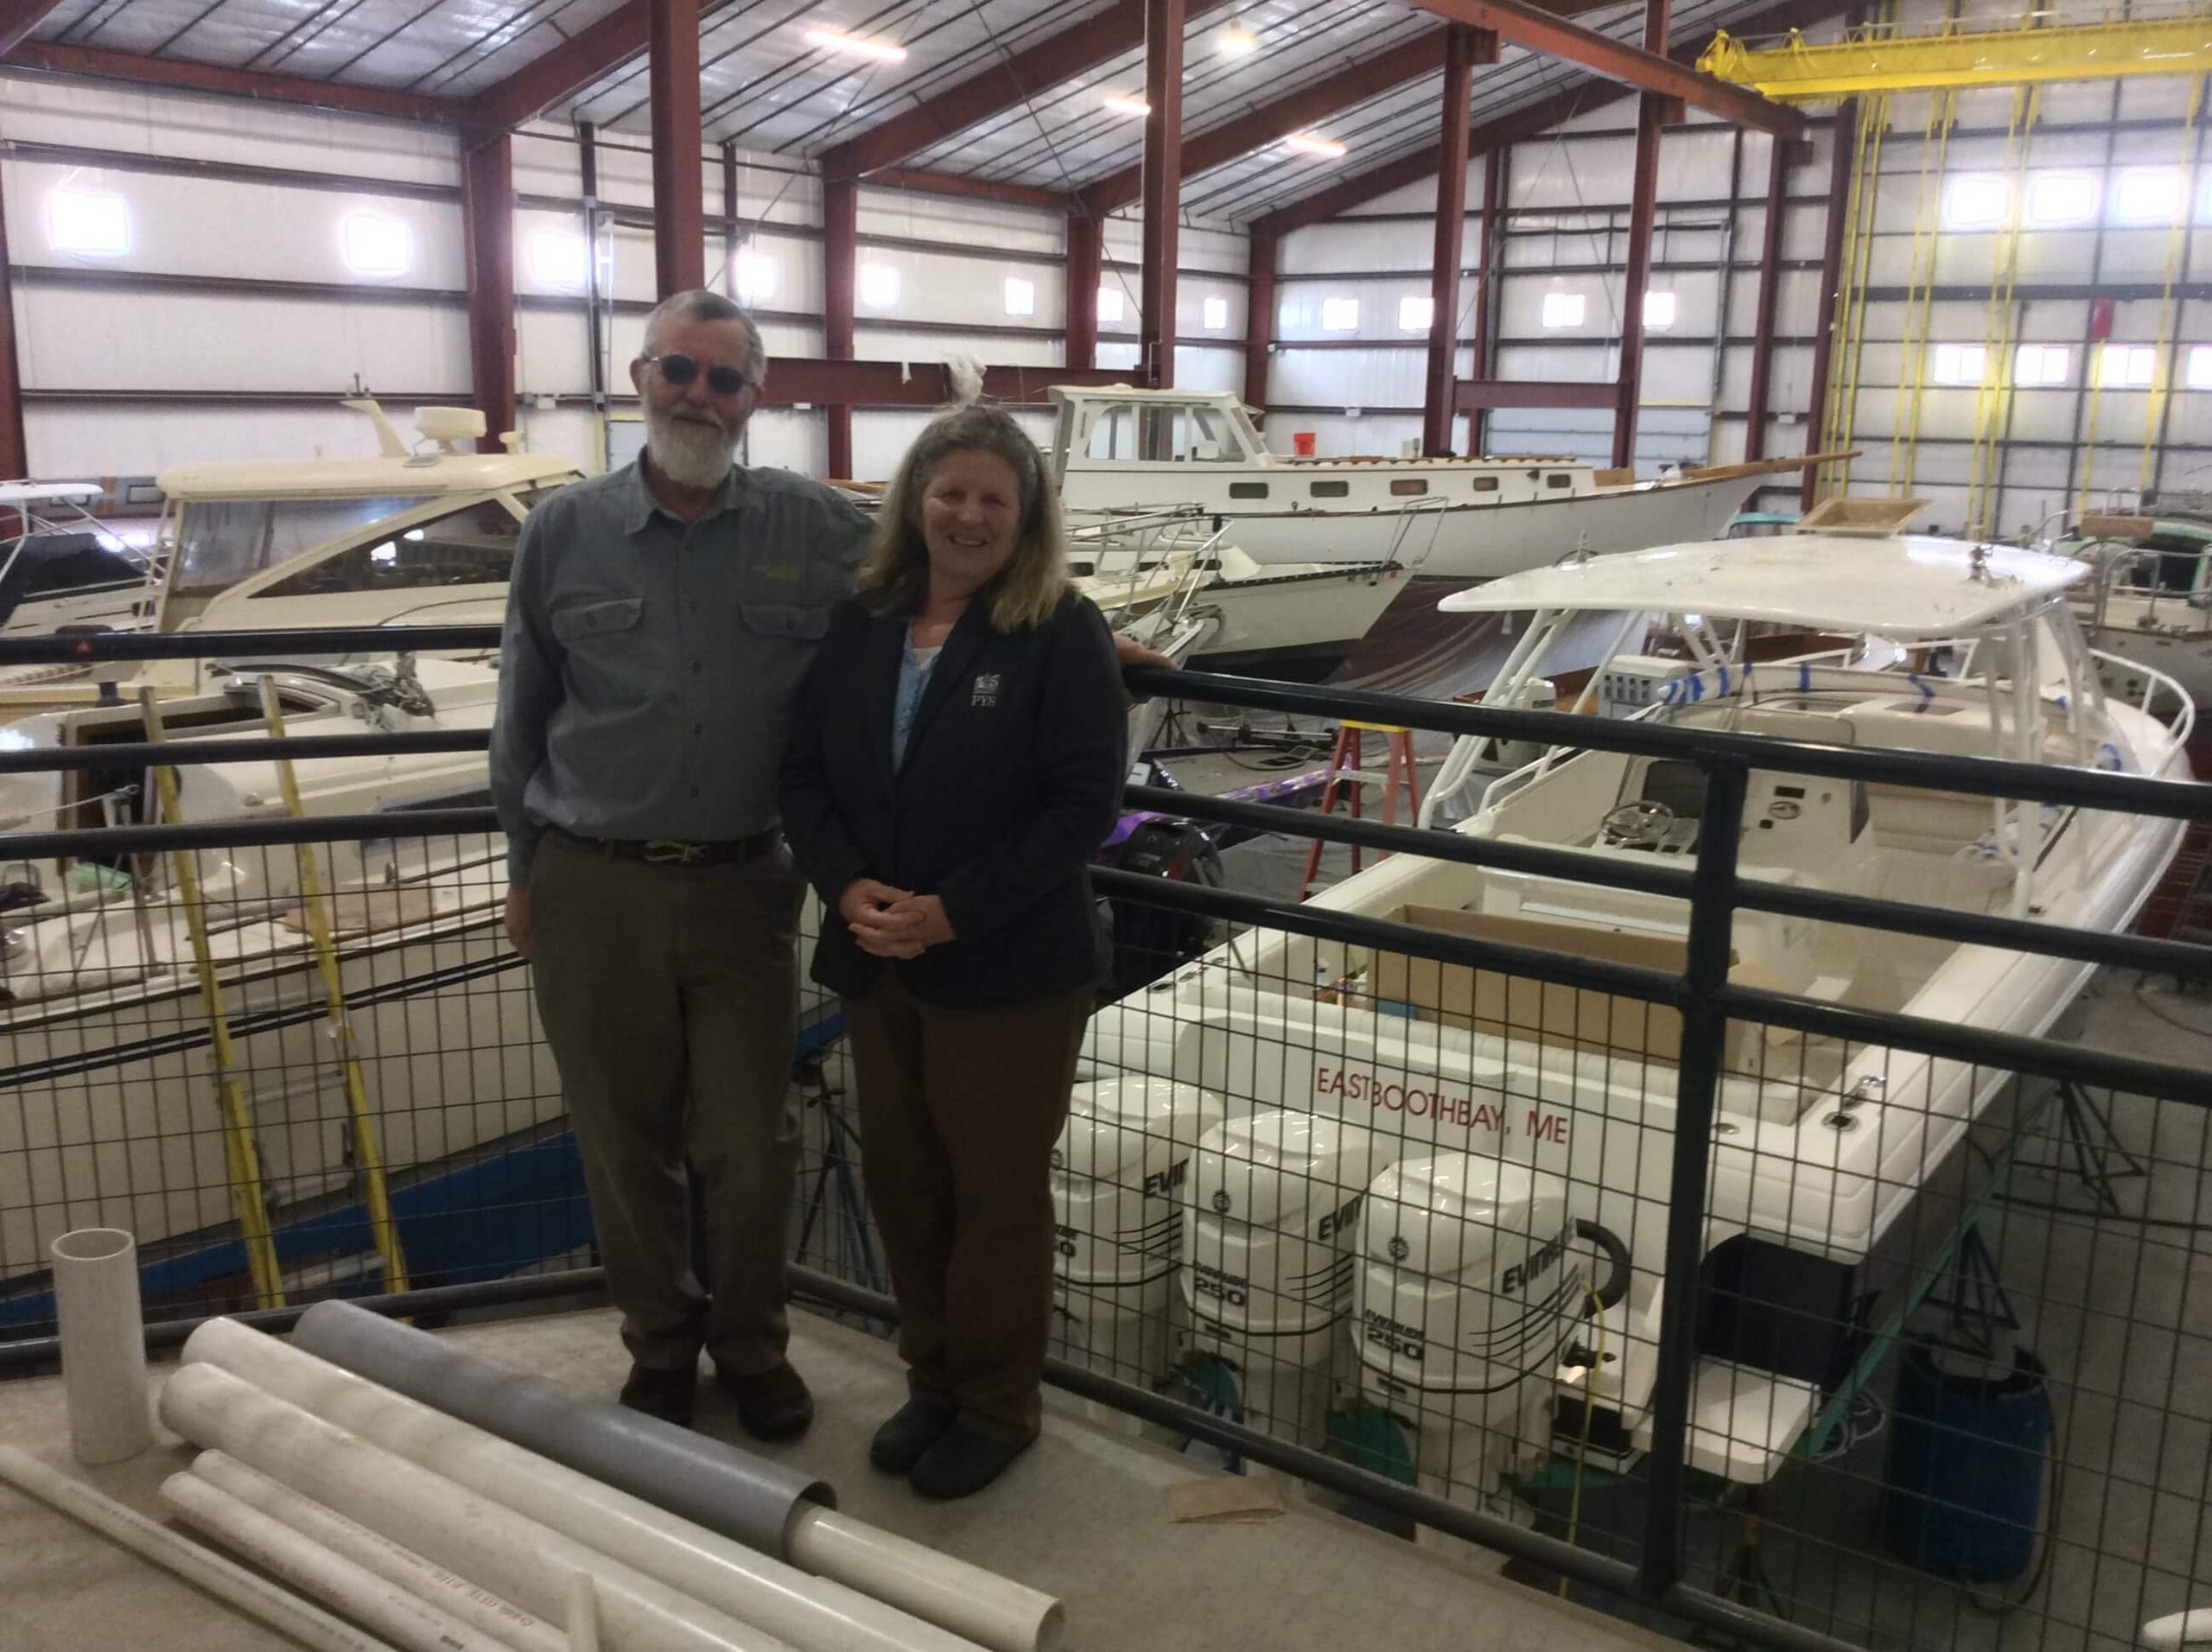 Man and woman in front of boats in inside storage facility